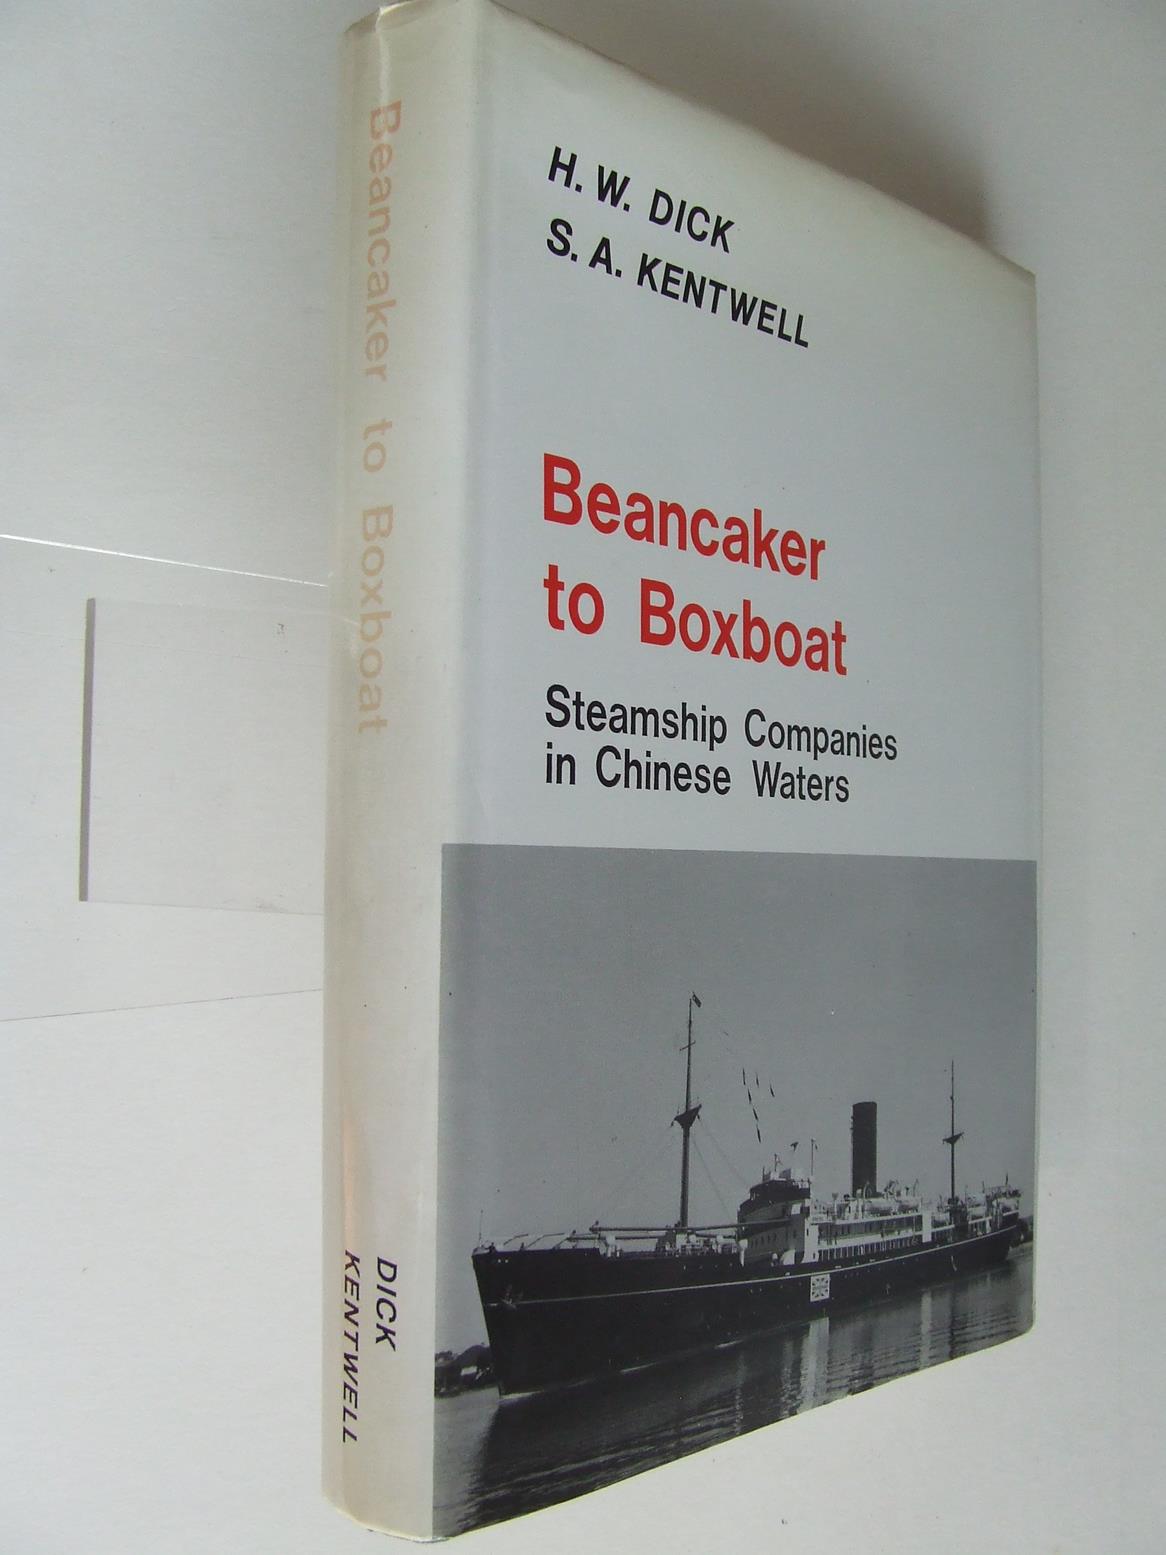 Beancaker to Boxboat. steamship companies in Chinese waters